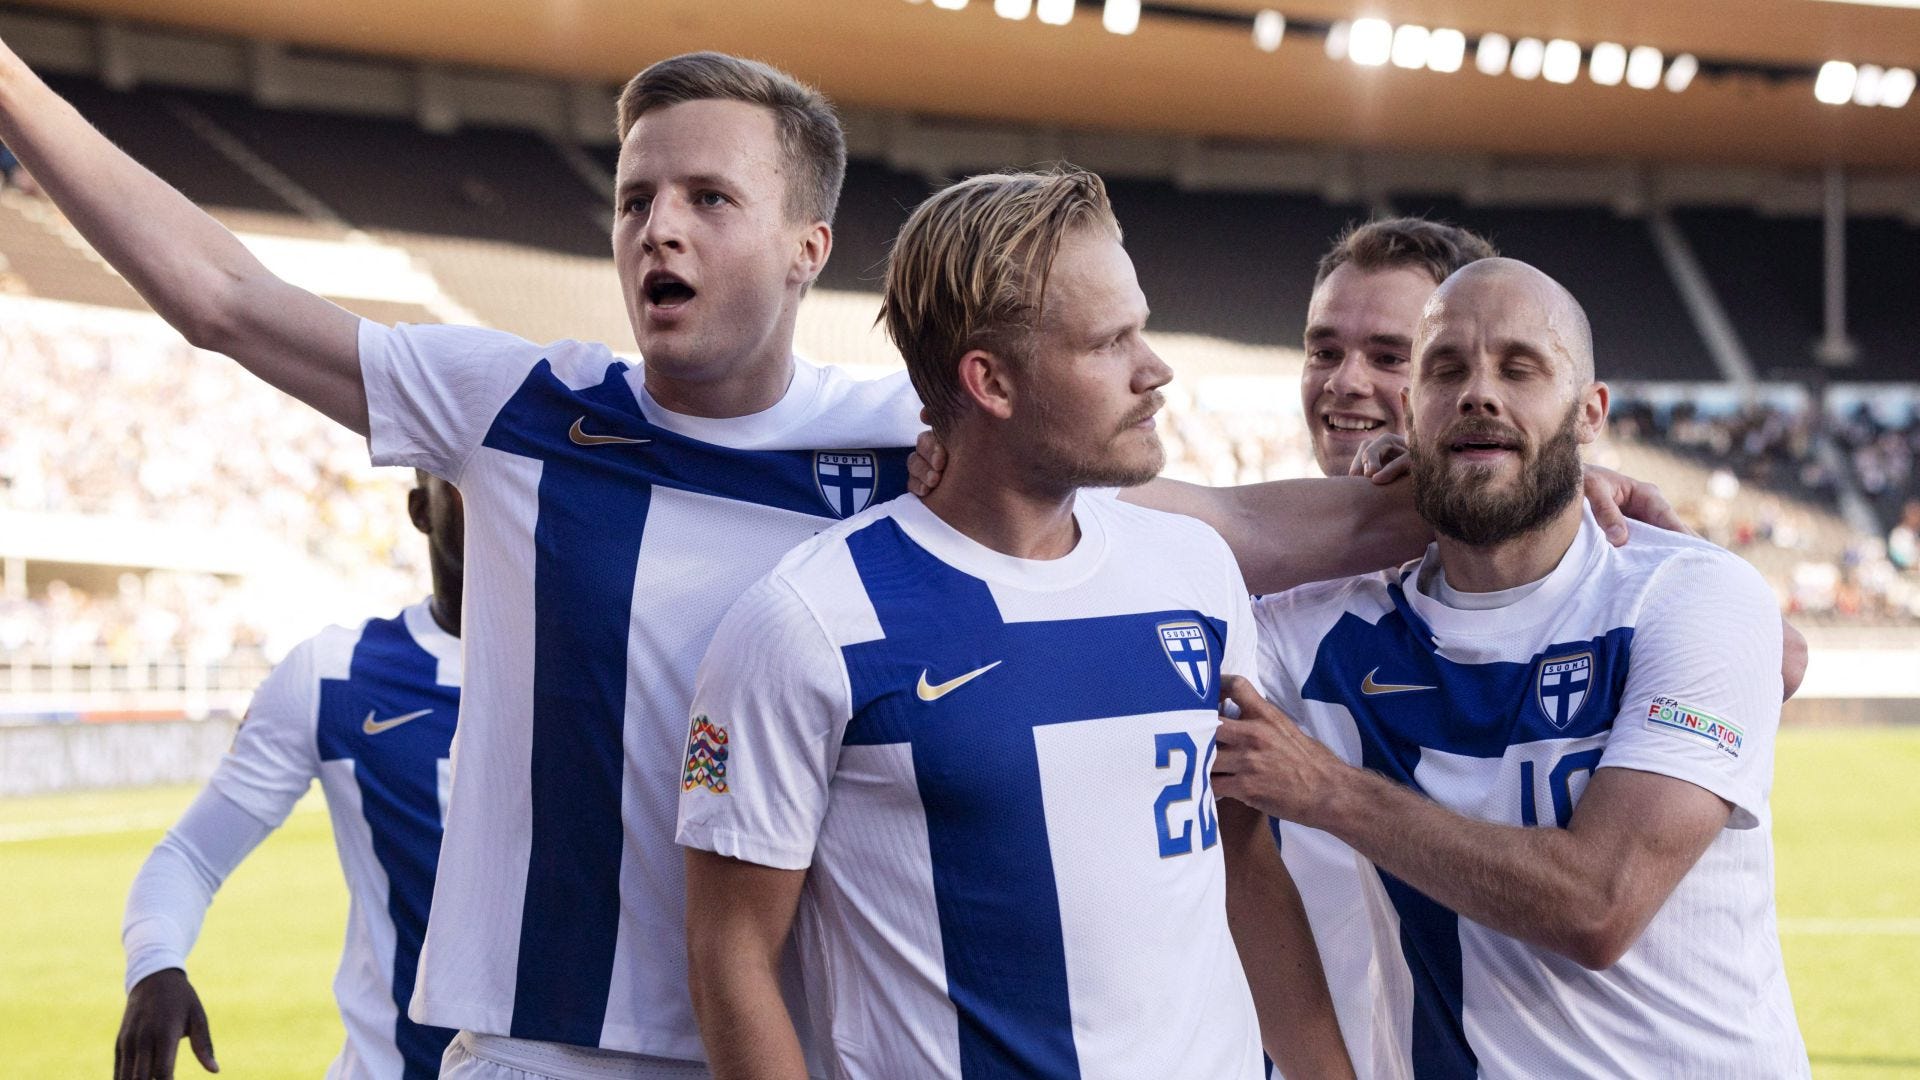 Montenegro vs Finland Live stream, TV channel, kick-off time and how to watch Goal US